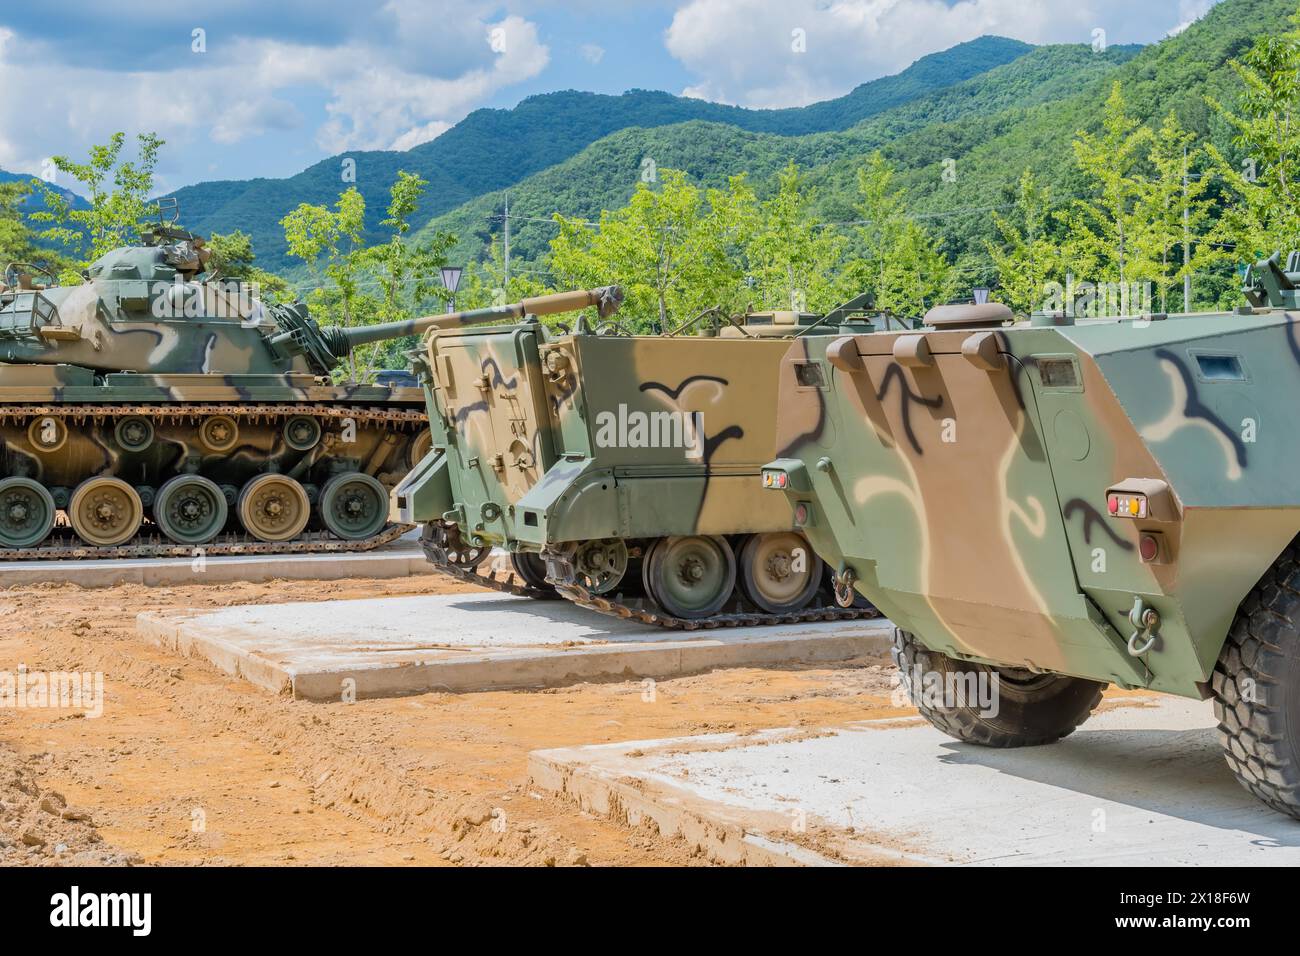 Military landing craft and tank used in Korean war on display in public park in Nonsan, South Korea Stock Photo